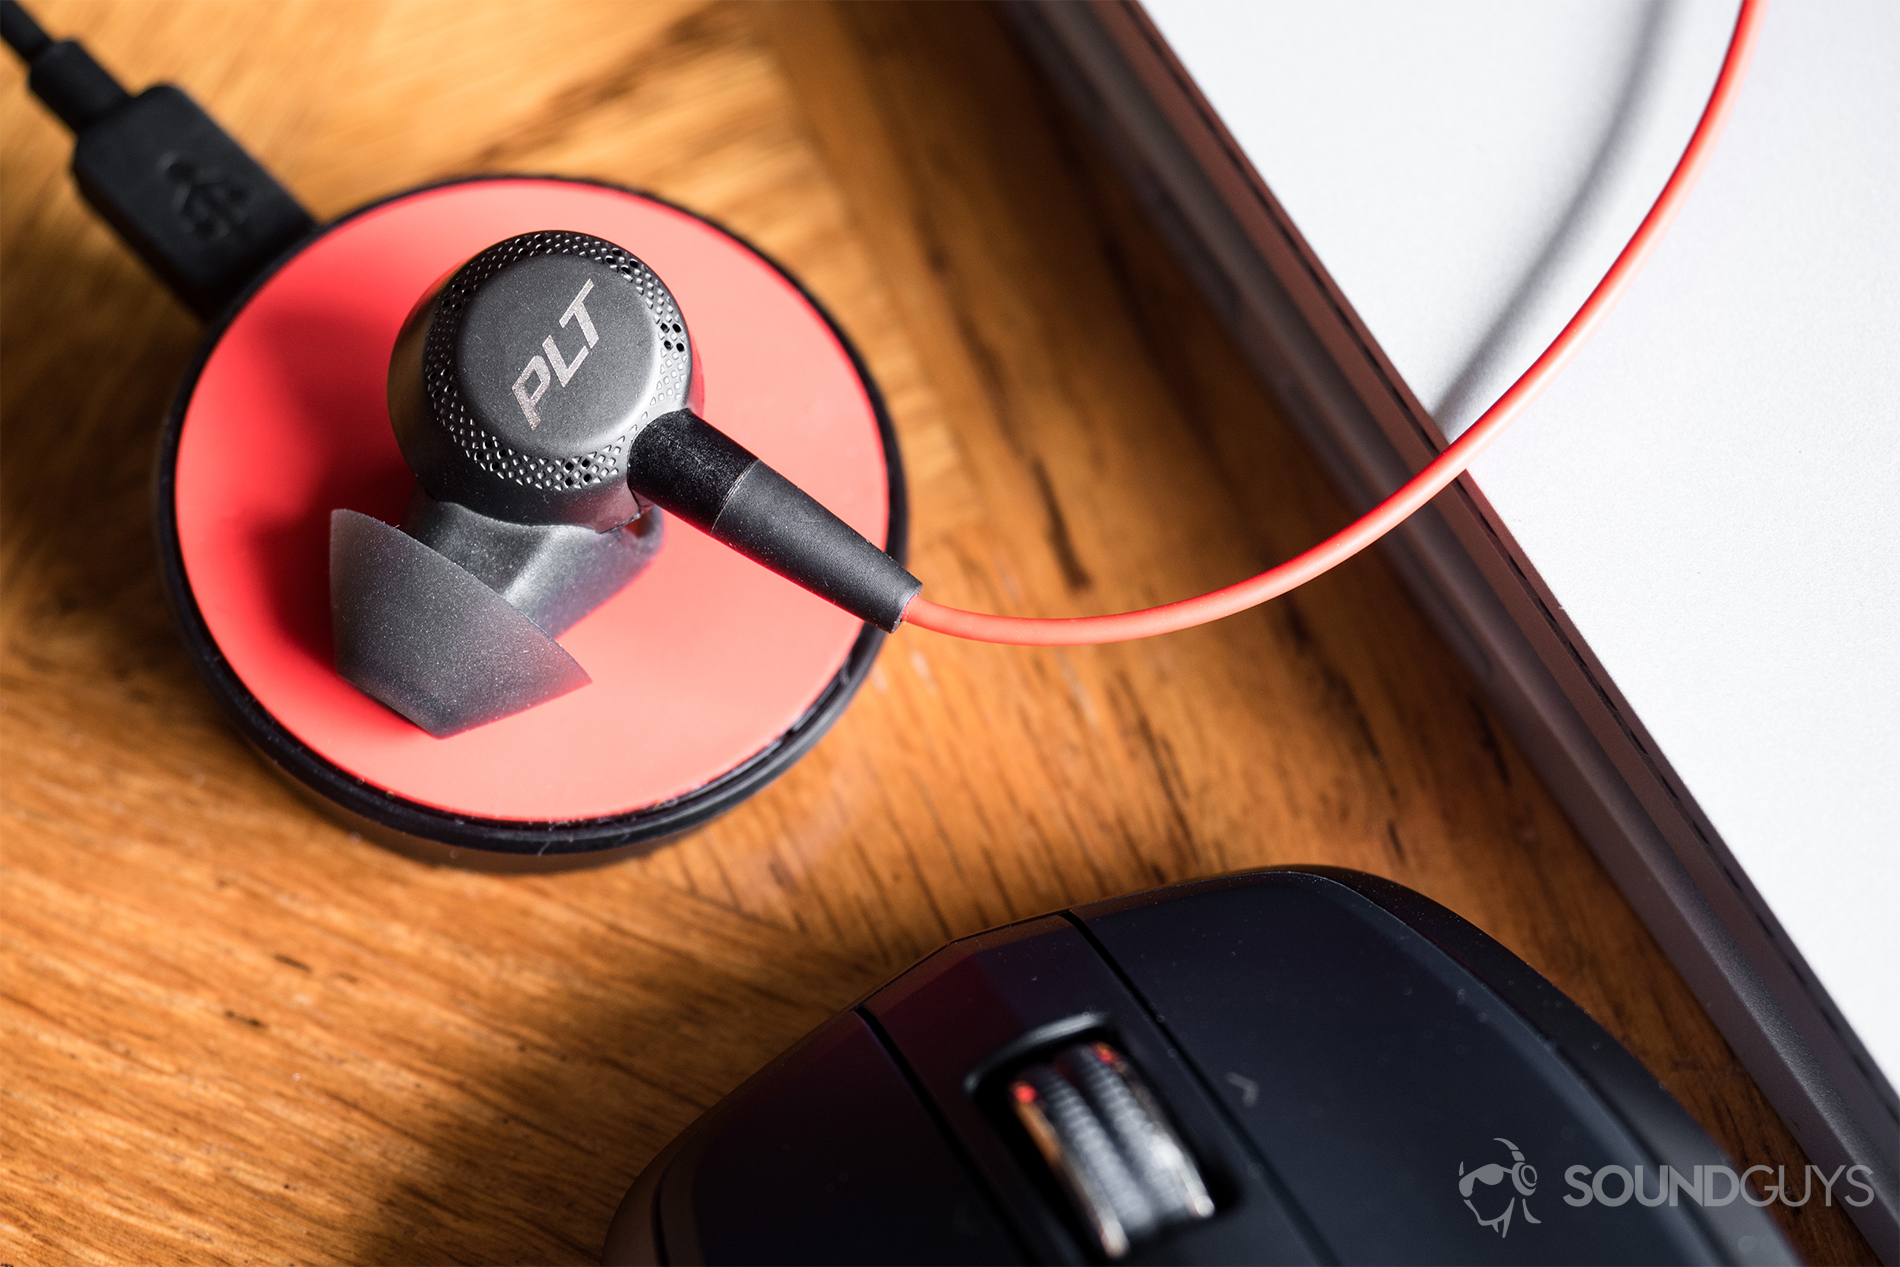 In typical Plantronics-style, the Voyager 6200 UC maintain a stable connection with ease. Class 1 Bluetooth allows for users to travel up to 30 meters from the source. Pictured: The earbud placed on the reverse side of the charging cradle. The bottom of it matches the orange/poppy-red accents of the headset. In the bottom-left corner of the photo is the top-third of a Logitec Anywhere MX mouse, and a Microsoft Surface Book takes up the upper-right, diagonal third of the photo.